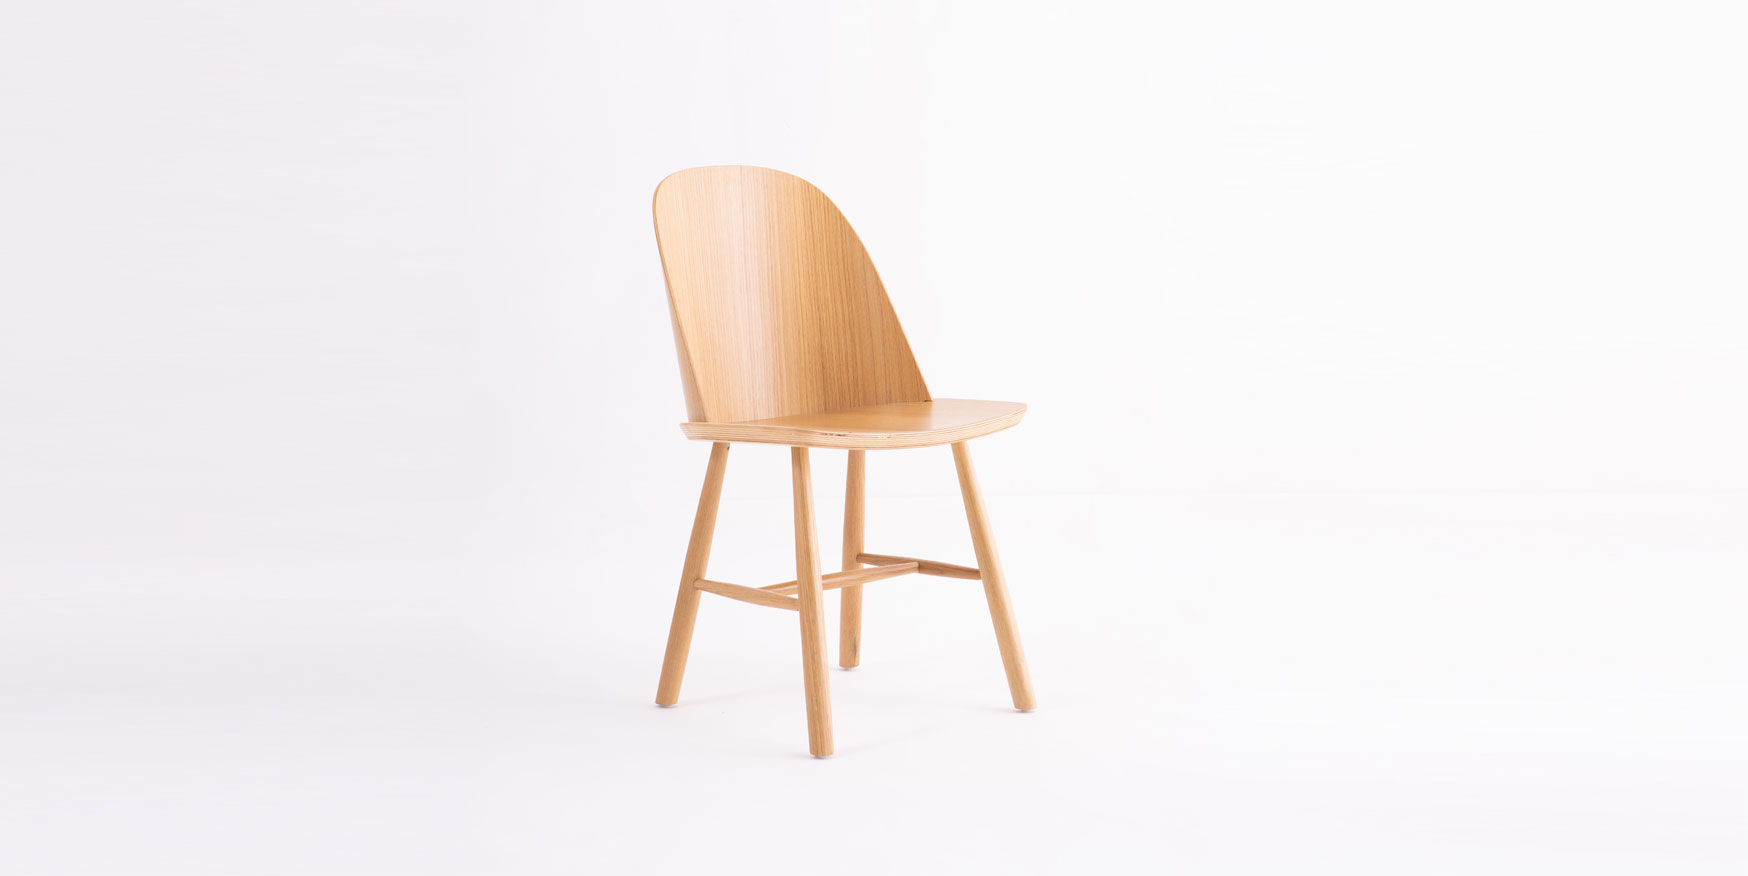 dining table chair size
